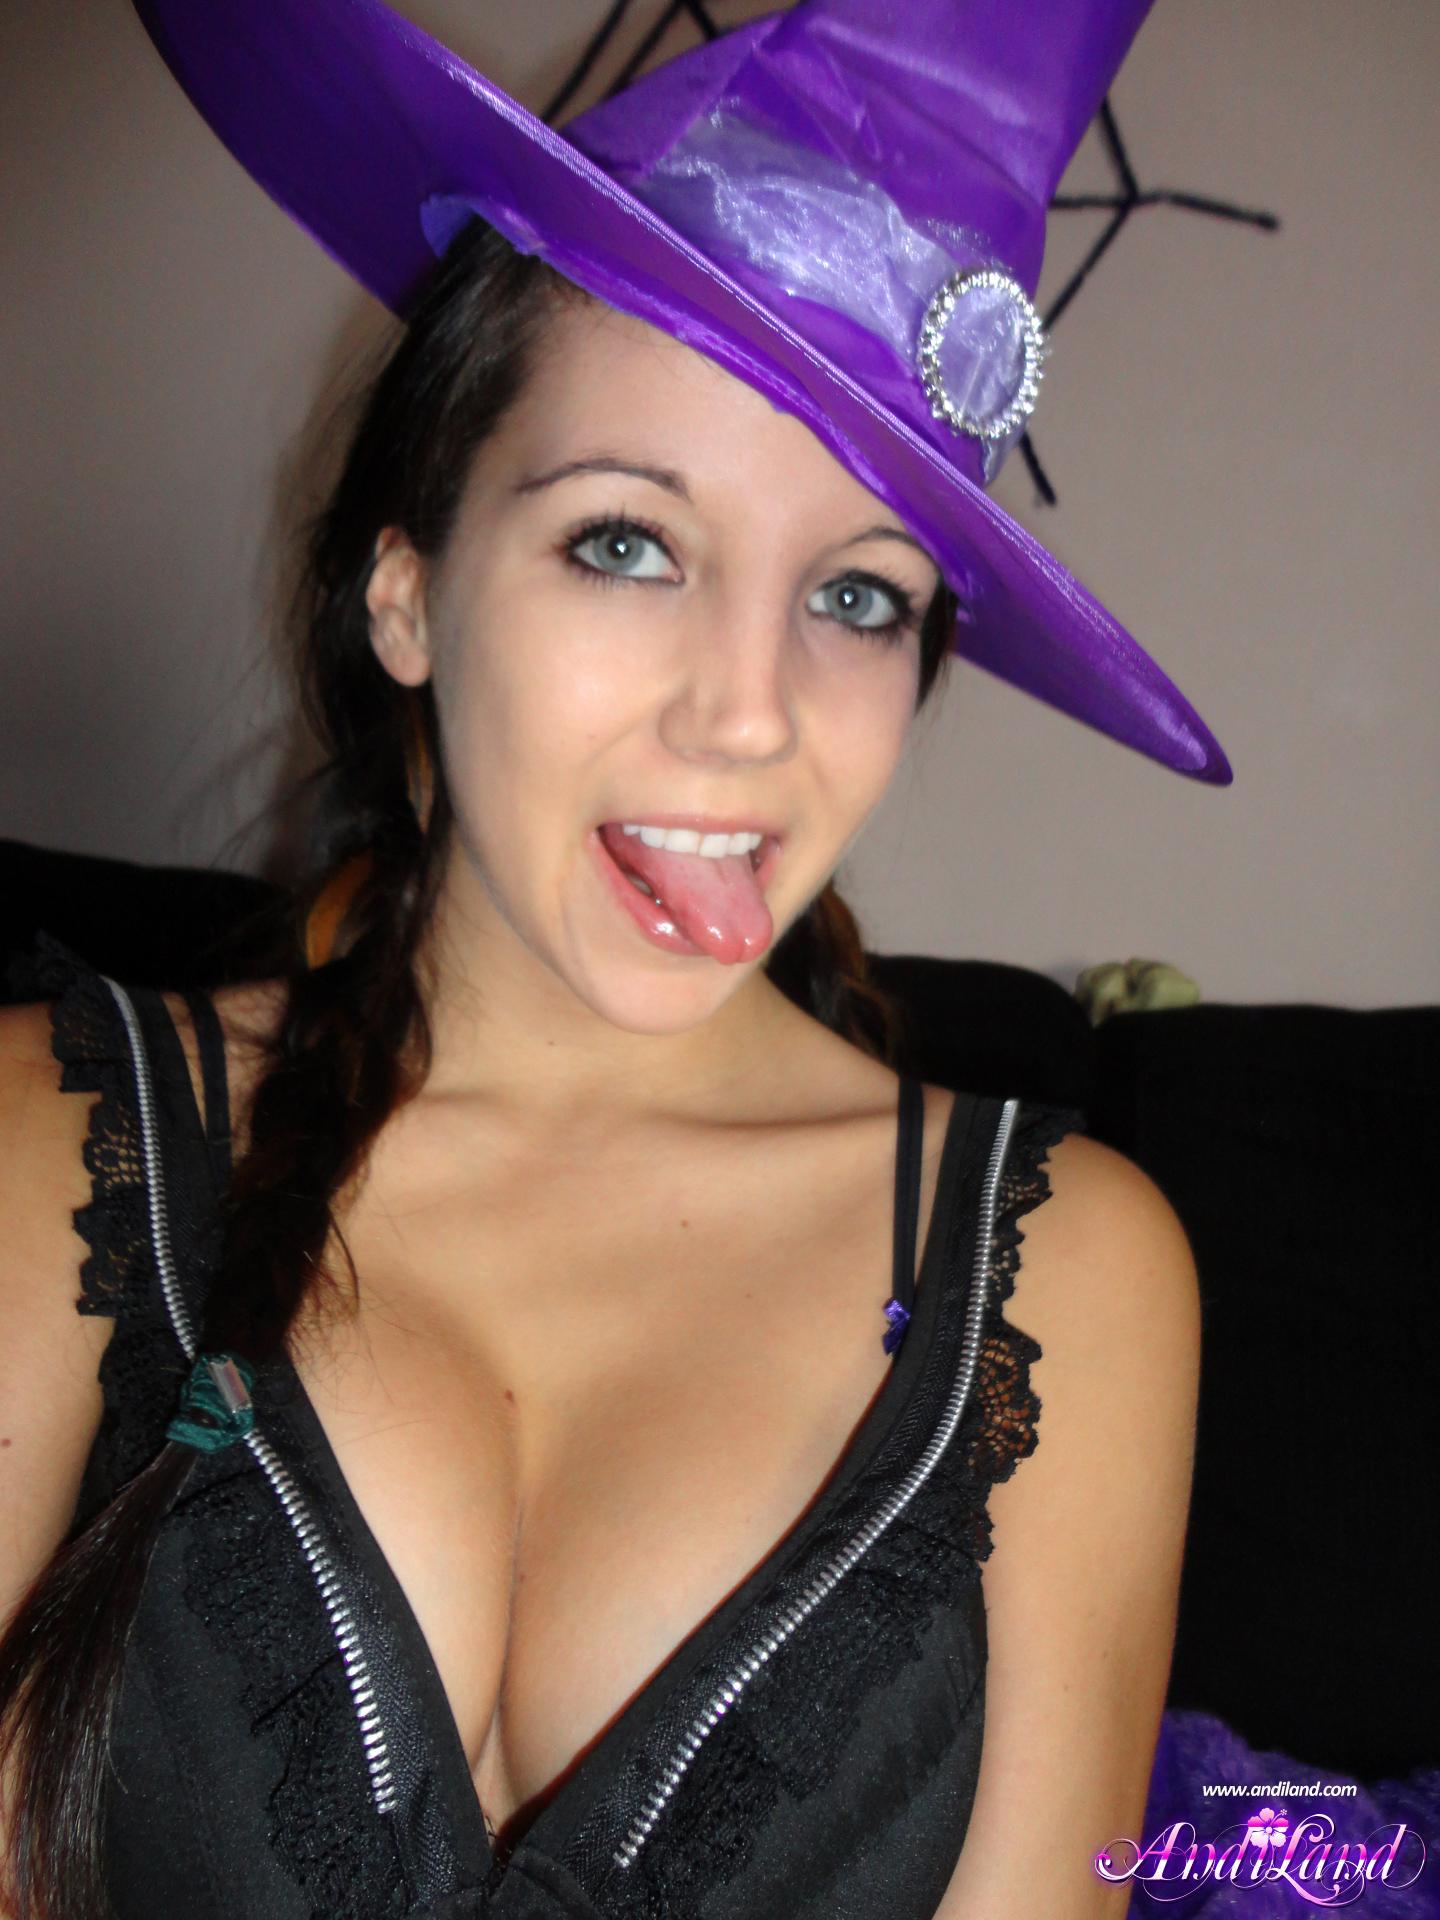 Pictures of Andi Land dressed as a super sexy witch for Halloween #53142226